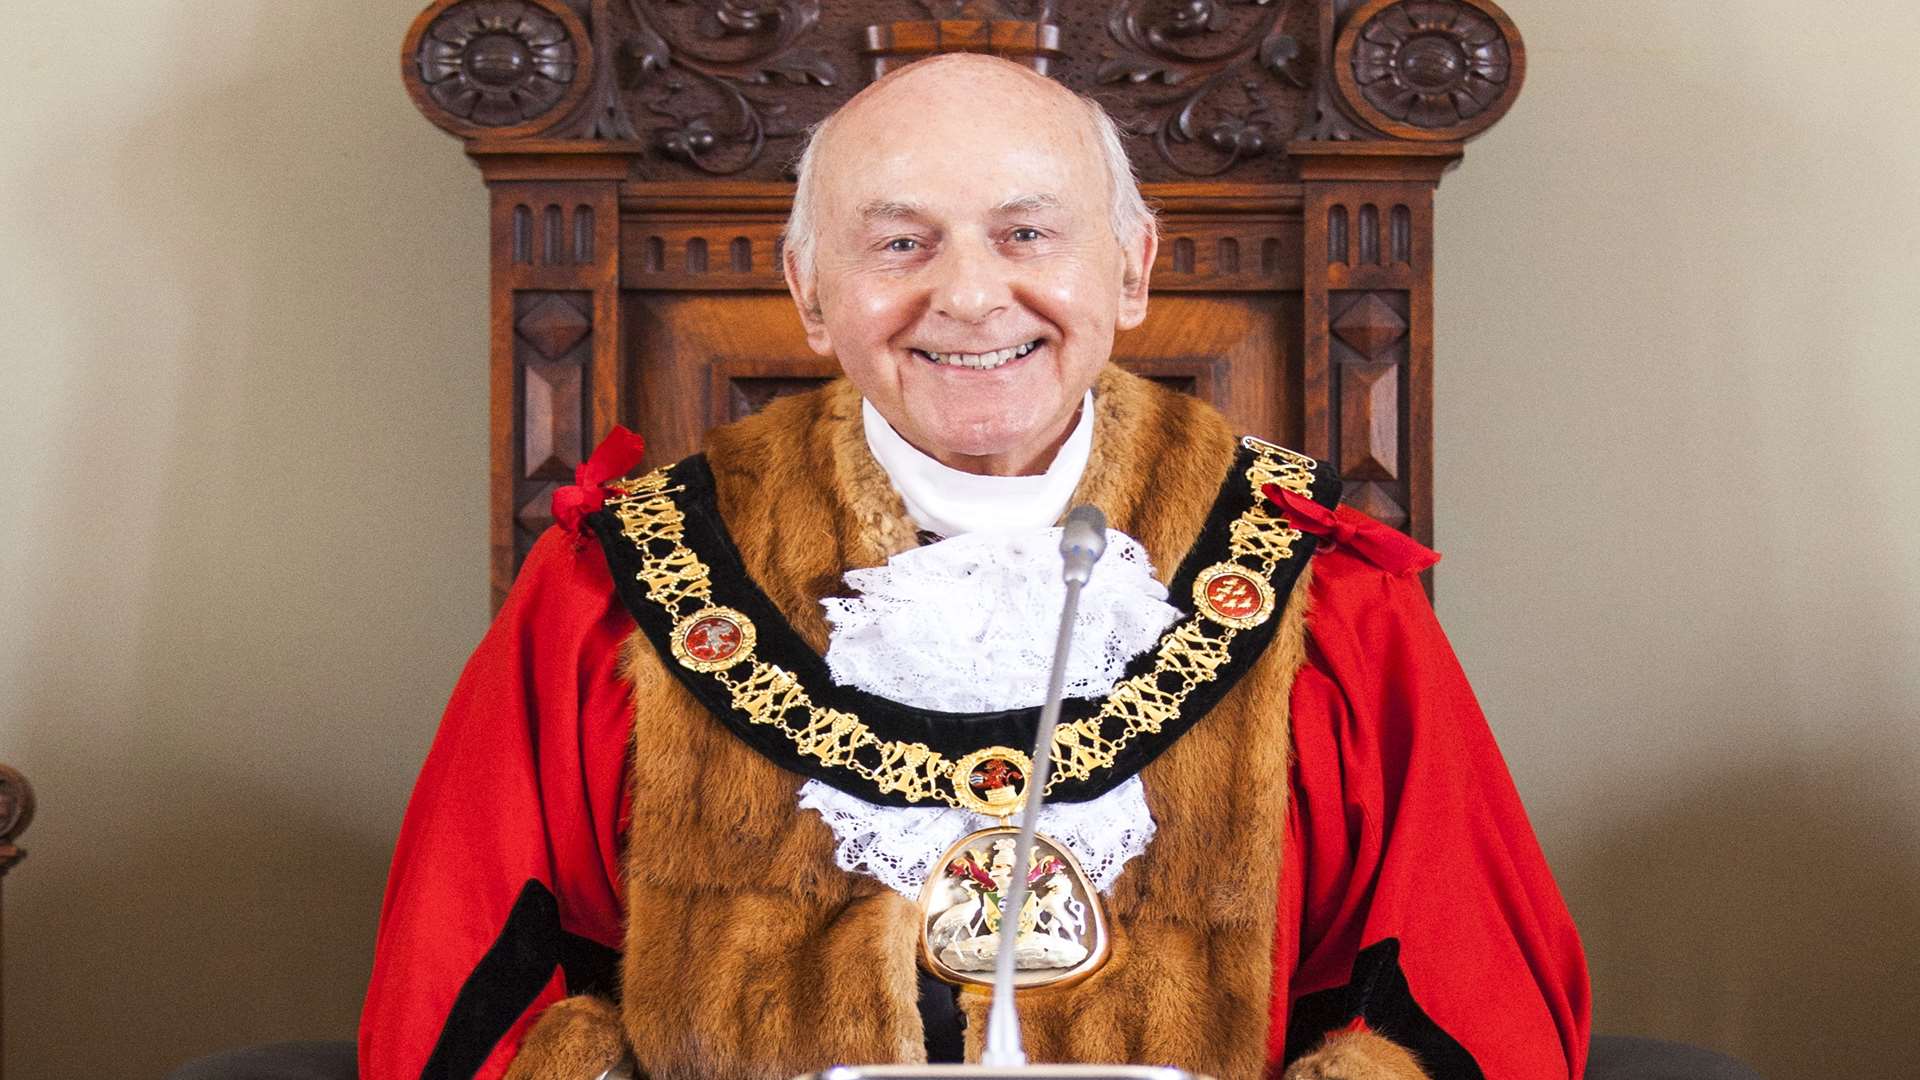 Councillor Stanyer